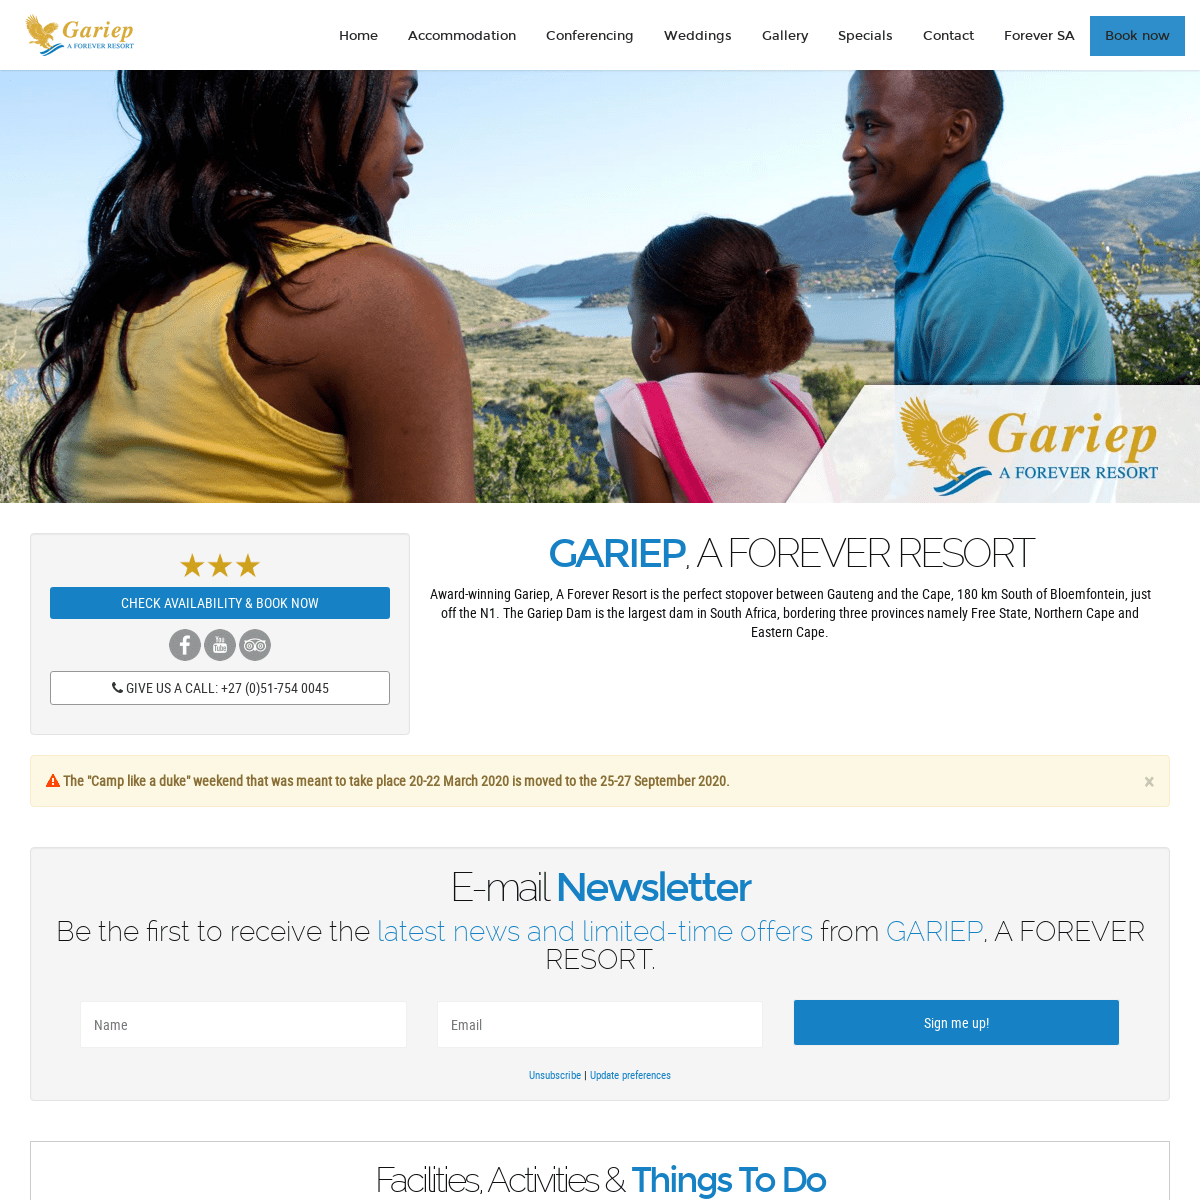 A complete backup of forevergariep.co.za